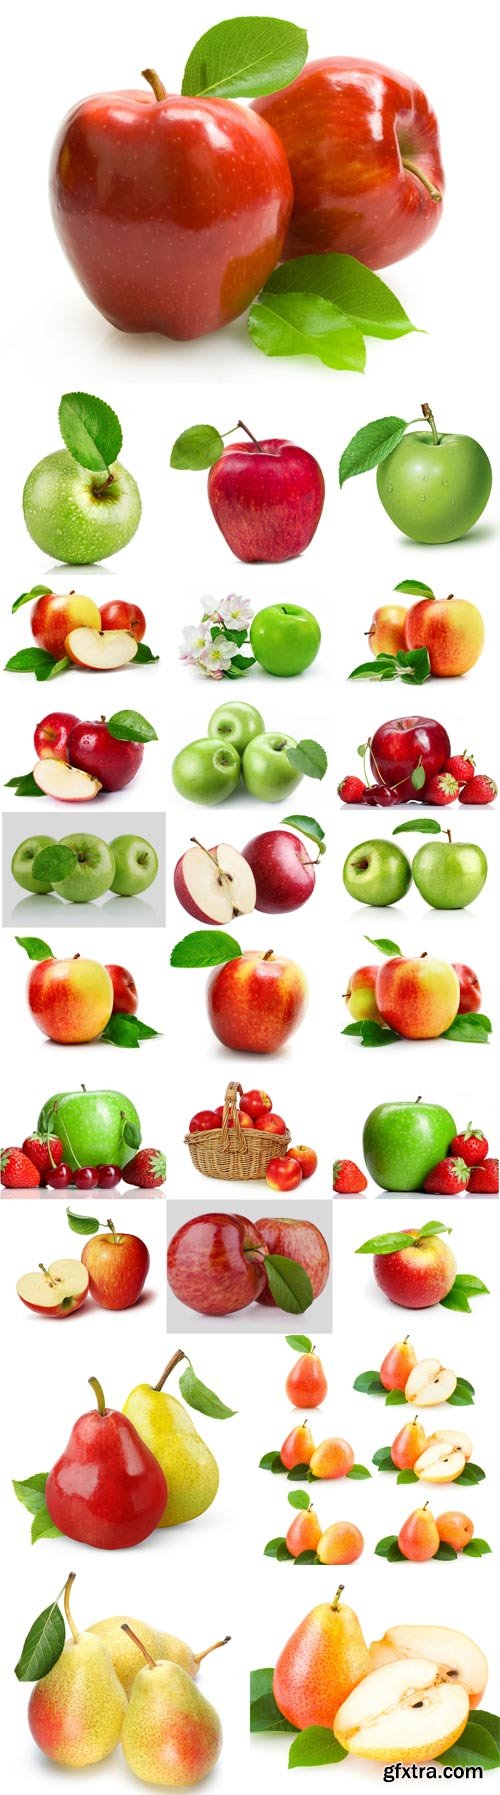 Apple and pear raster graphics